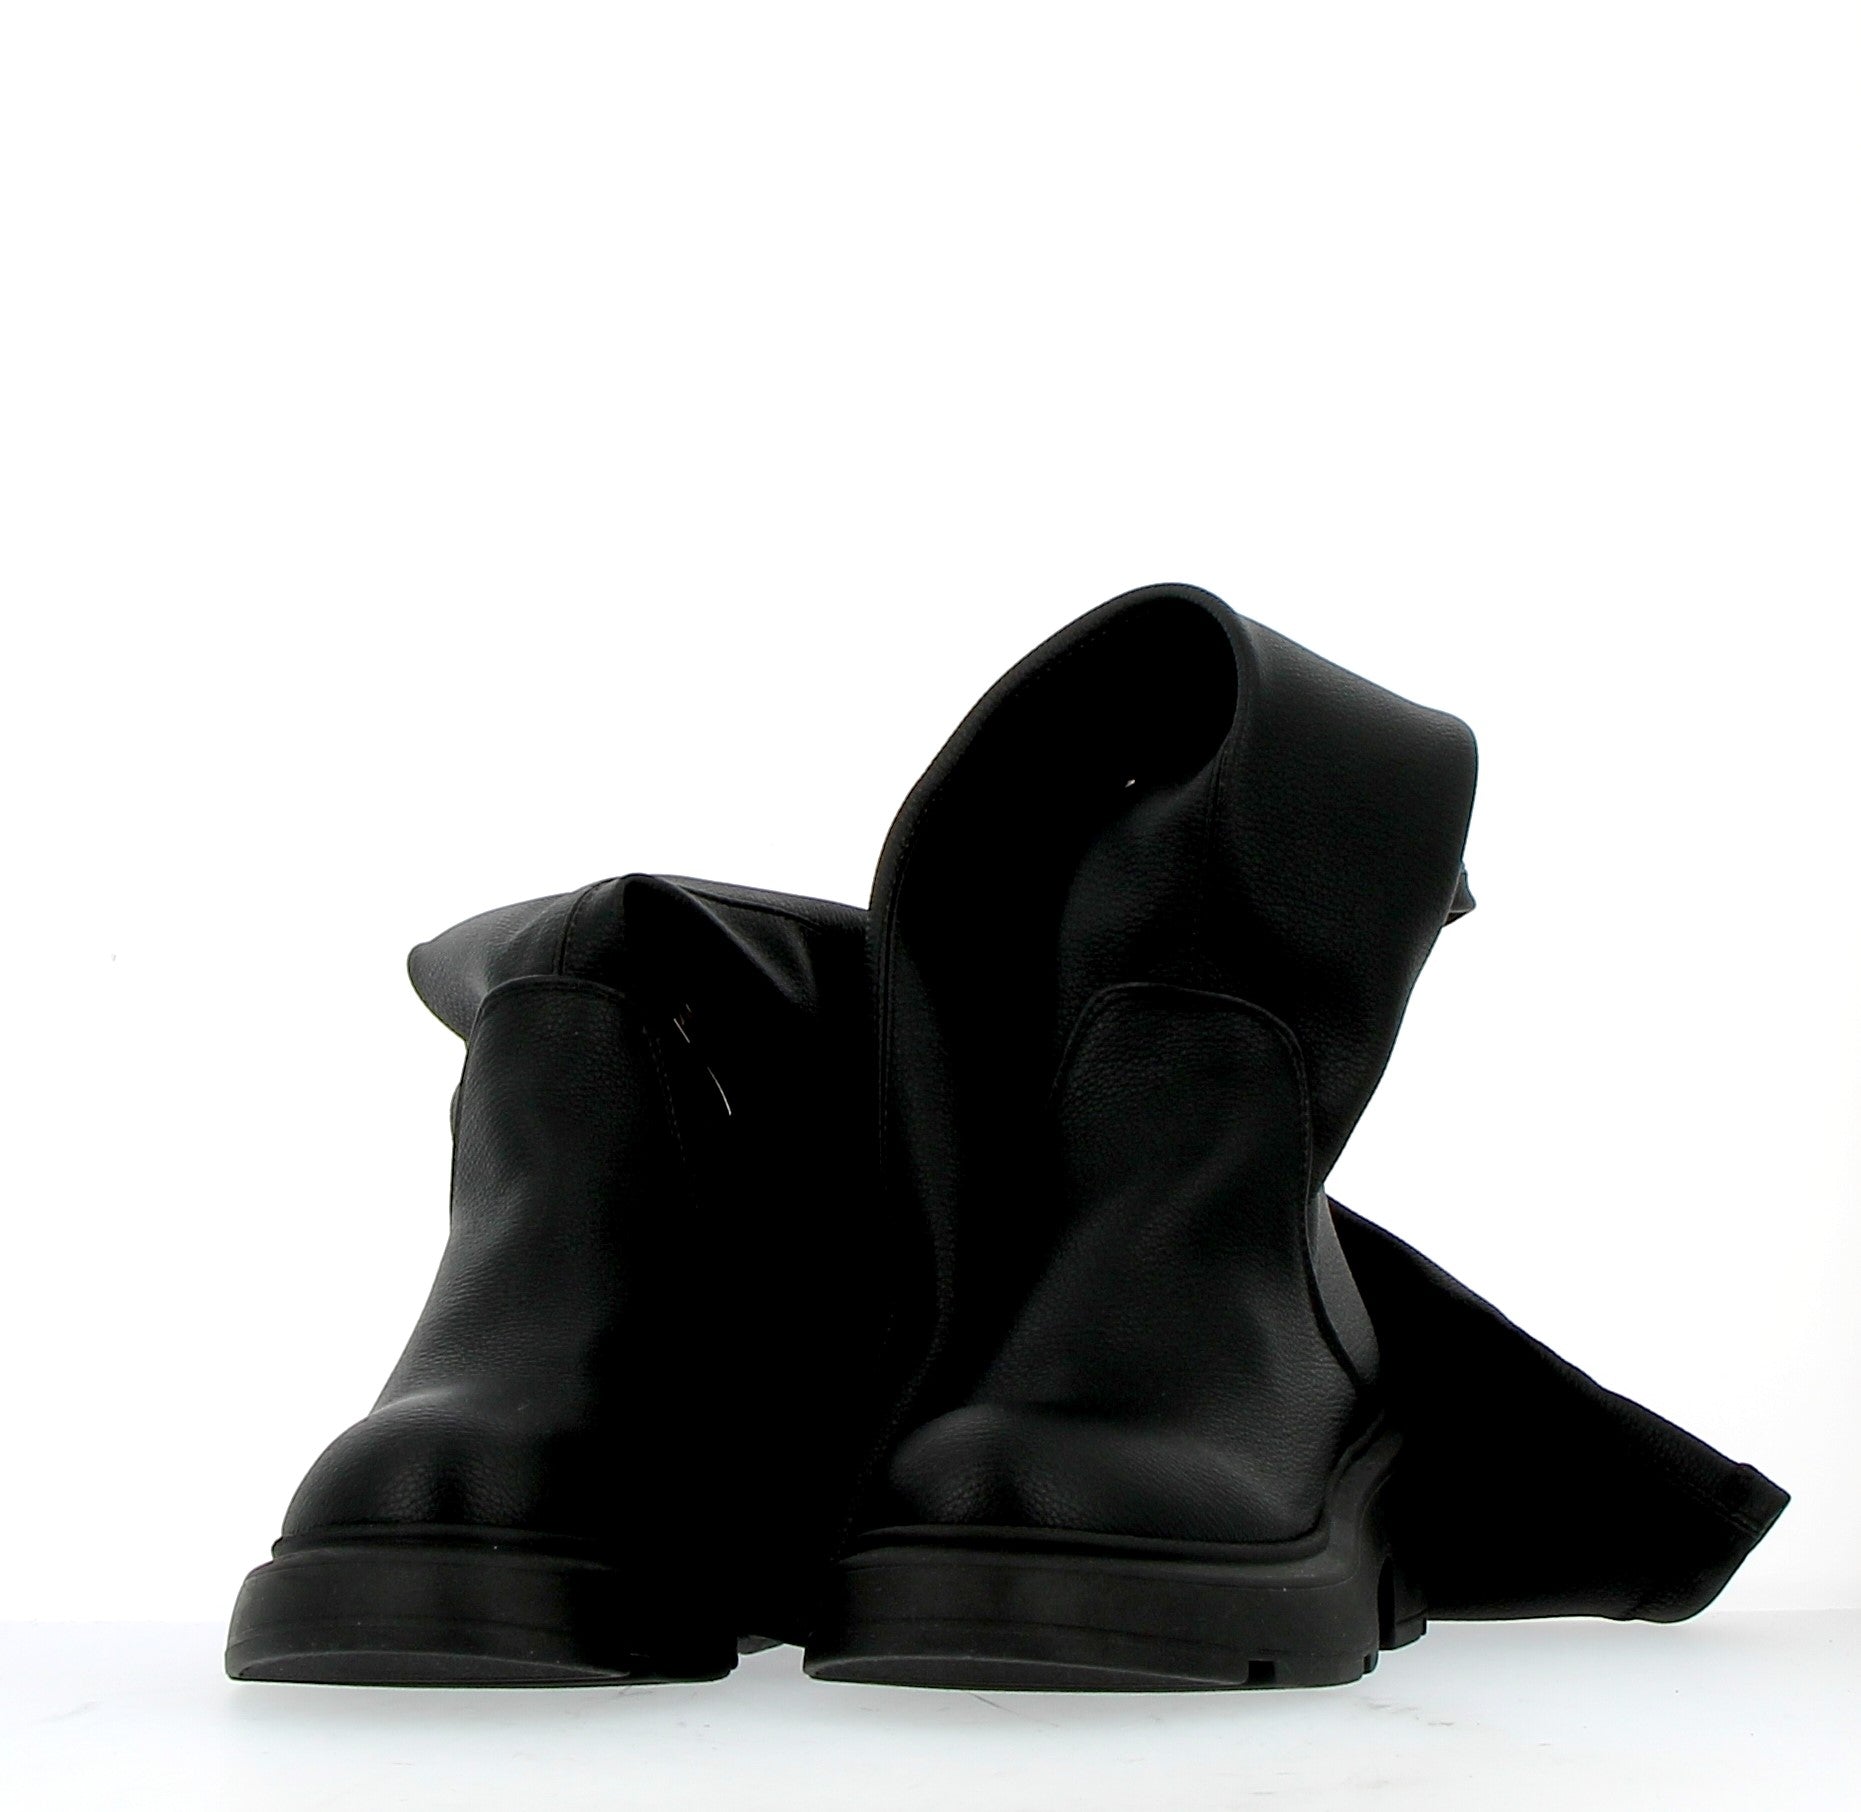 Zipped ankle boot in black leather